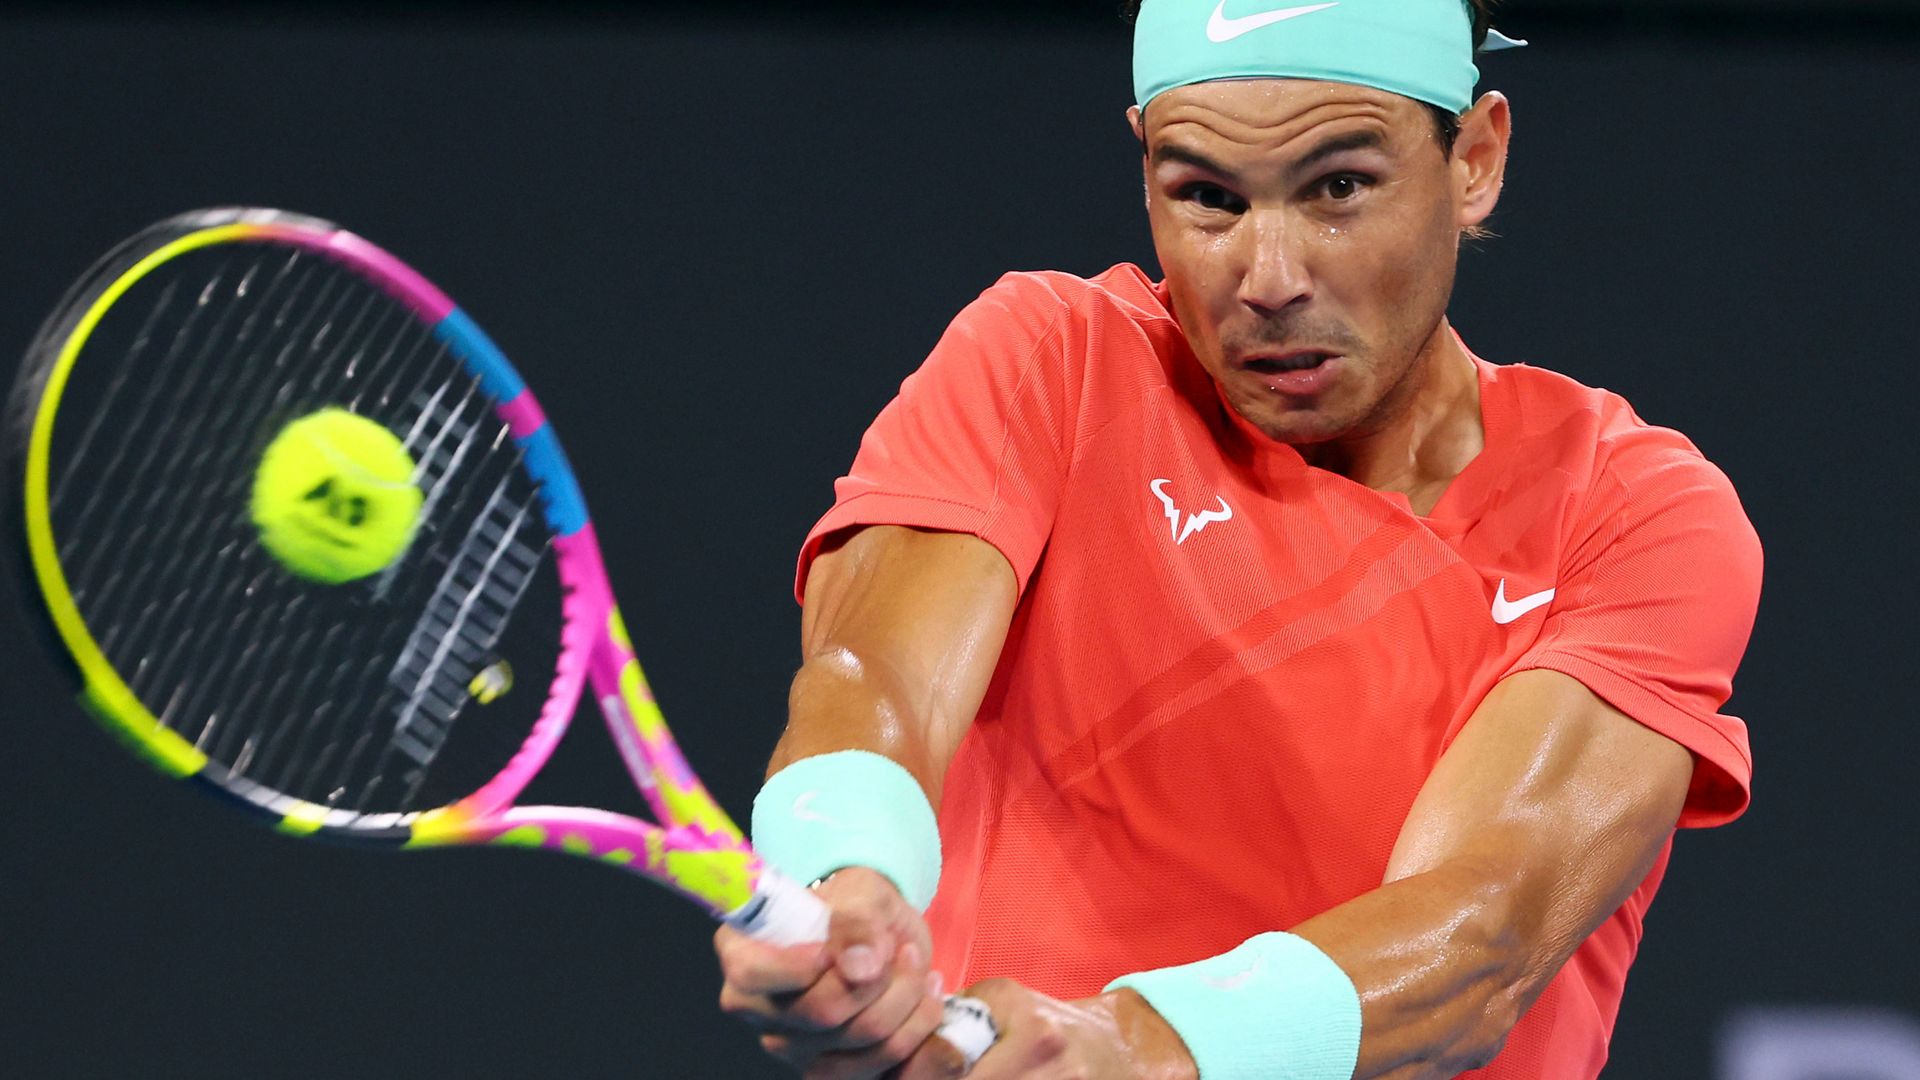 Nadal comeback continues with second win in Brisbane